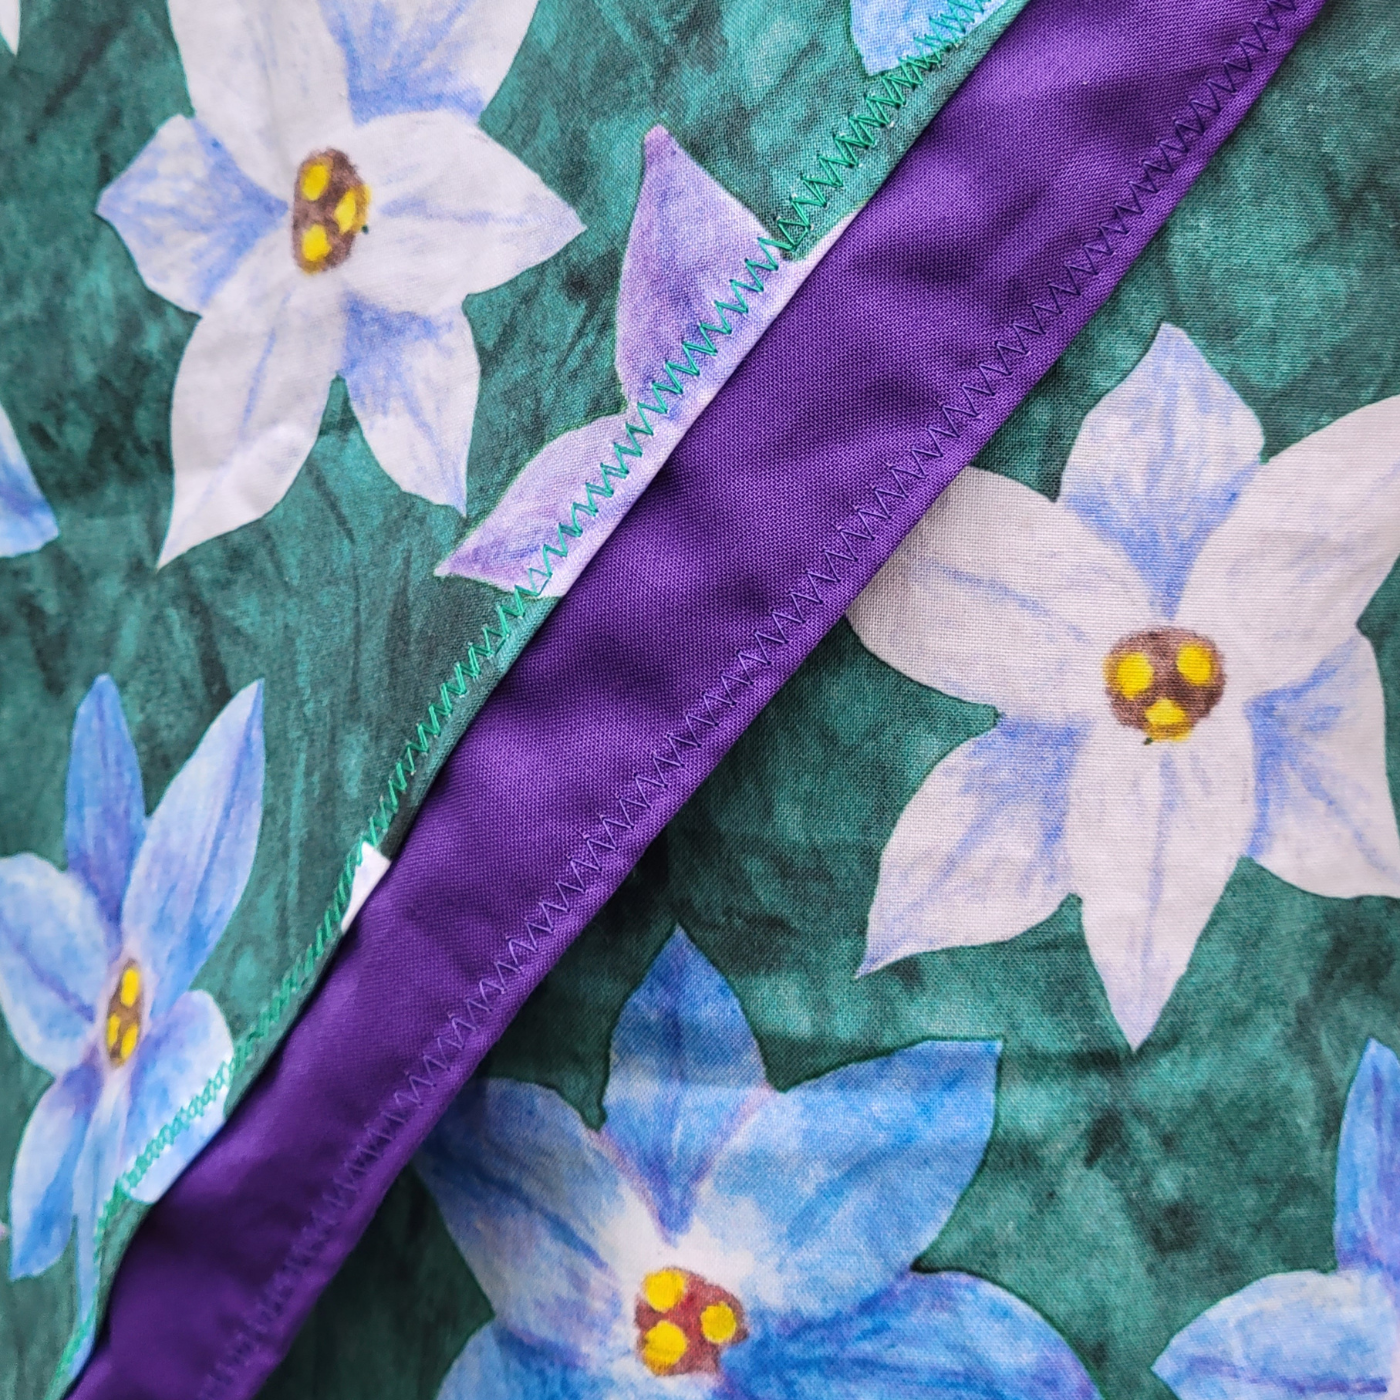 A close up of a wrap skirt featuring a design with large purple, white and blue starflowers. The skirt has a strip of purple fabric on the wrapped section part of the fabric, which goes diagonally down the front of the skirt.